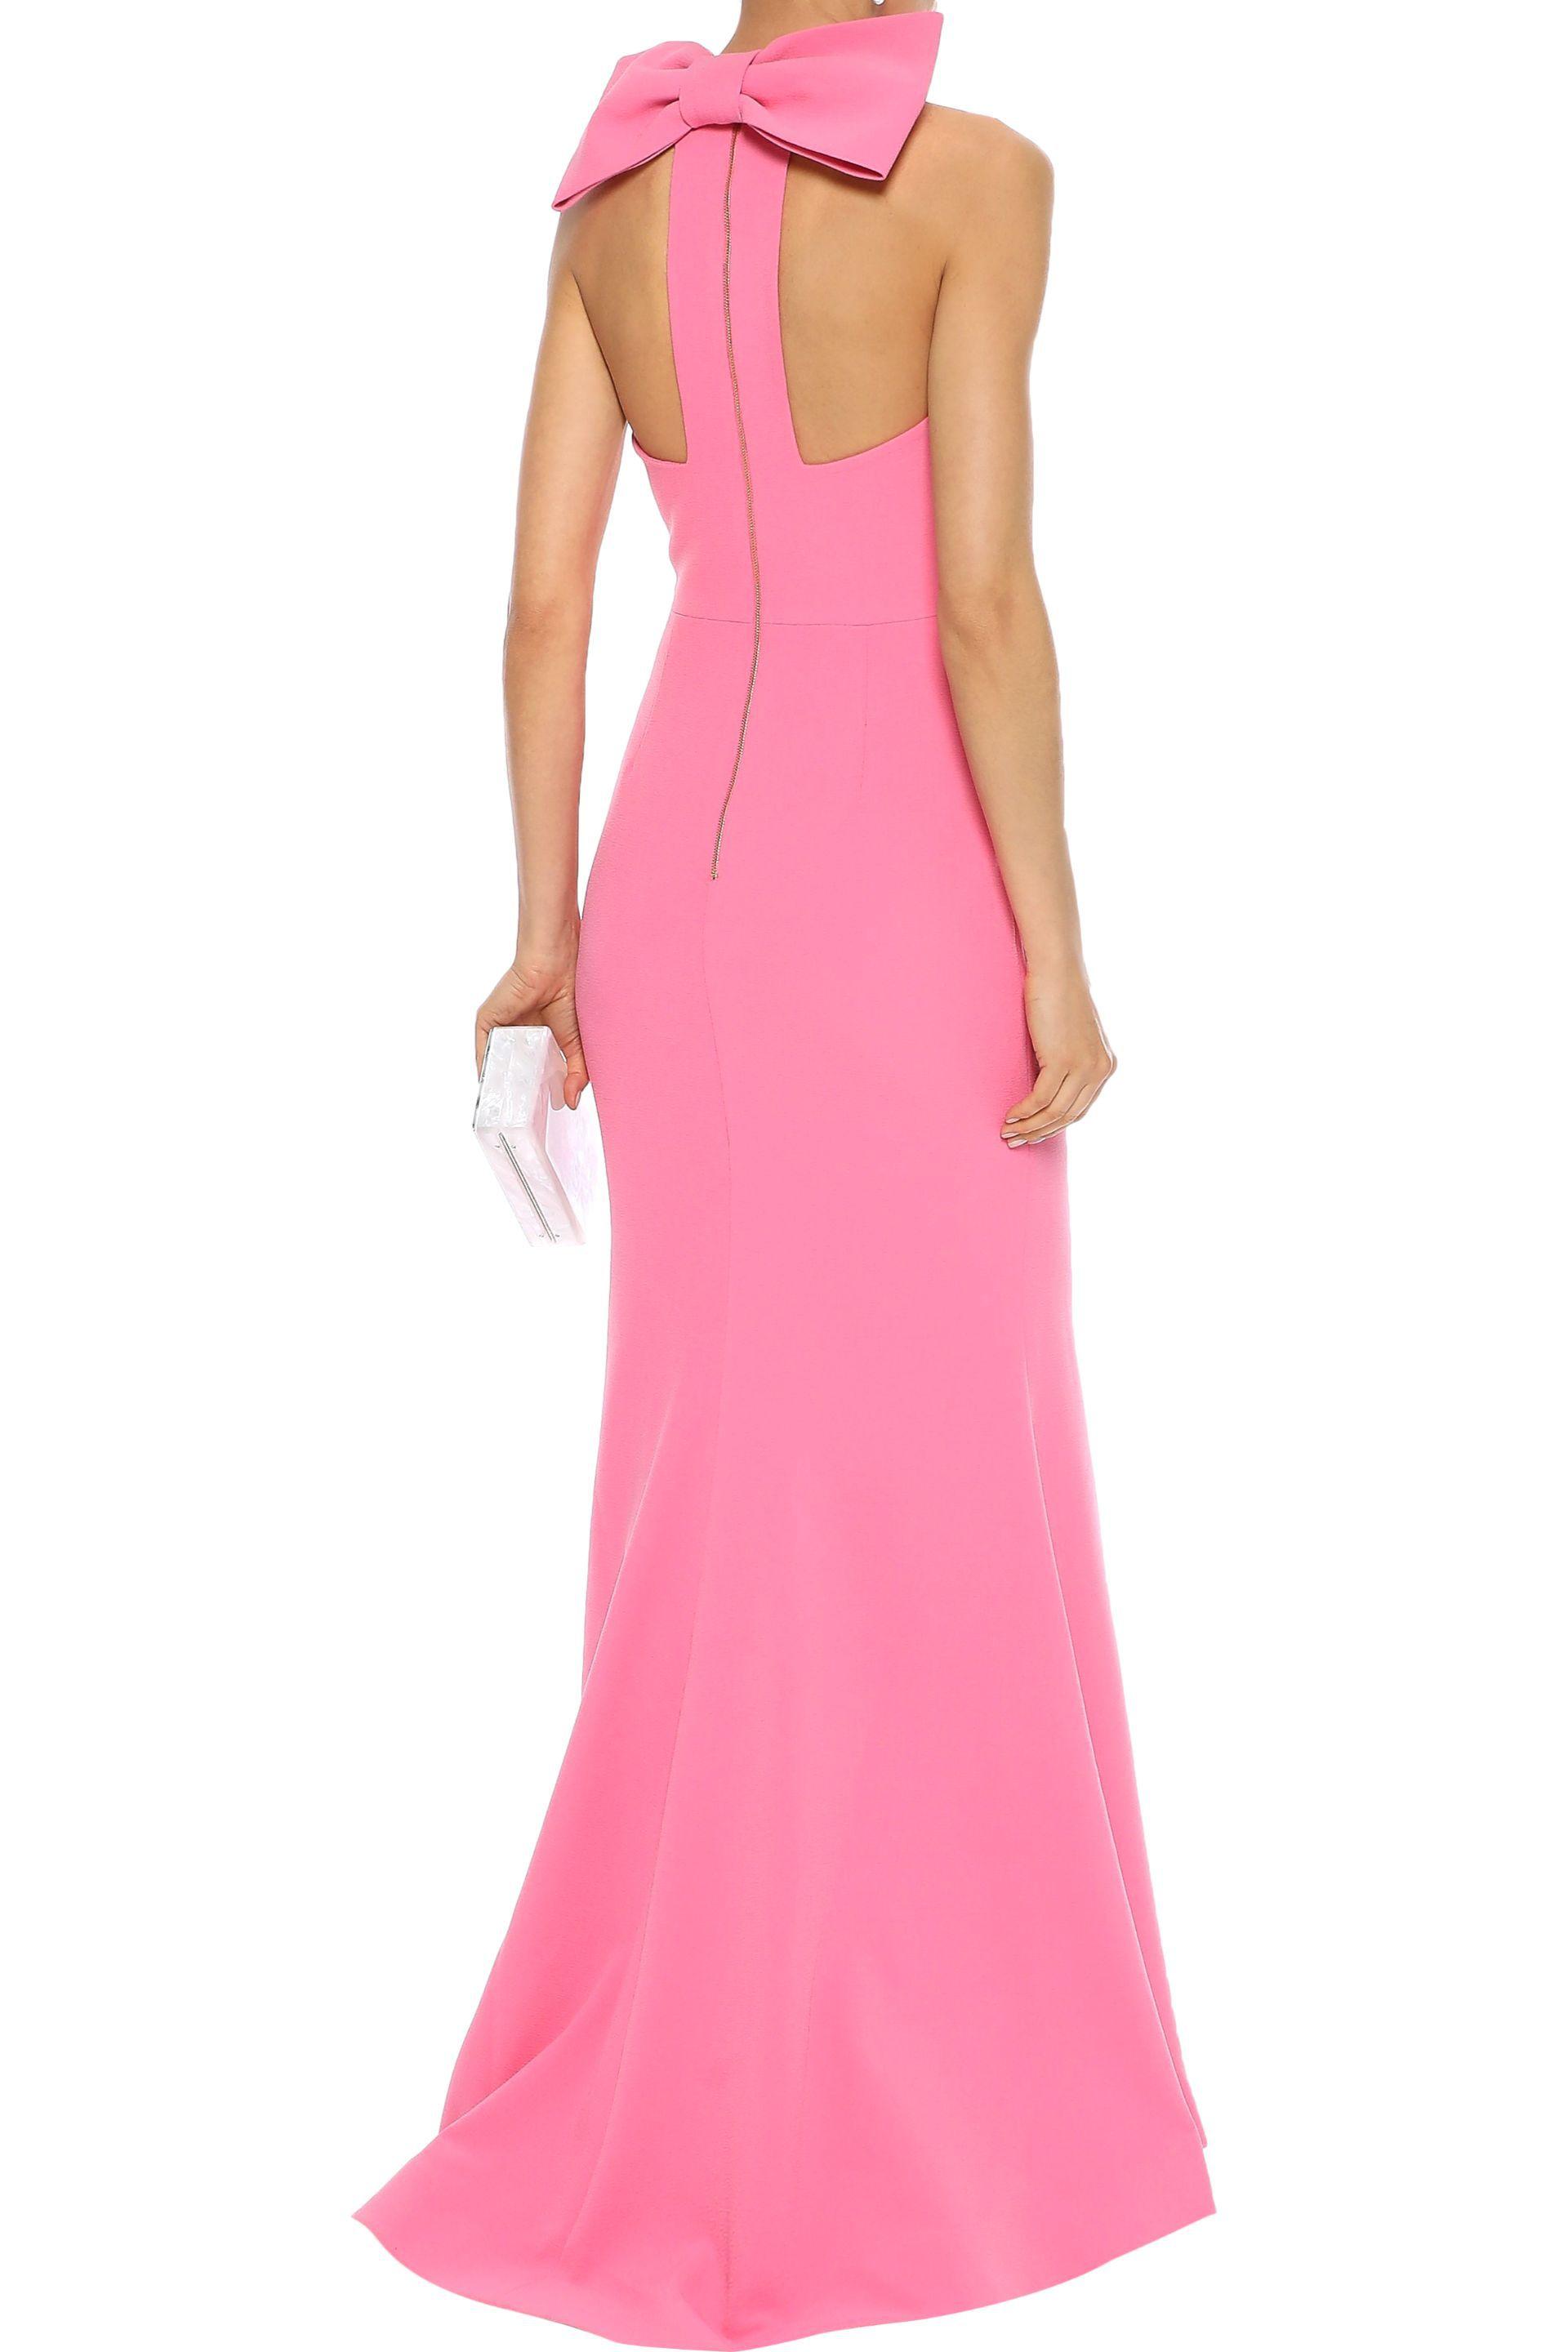 Rebecca Vallance Love Bow-embellished Cady Gown Pink in Pink - Lyst